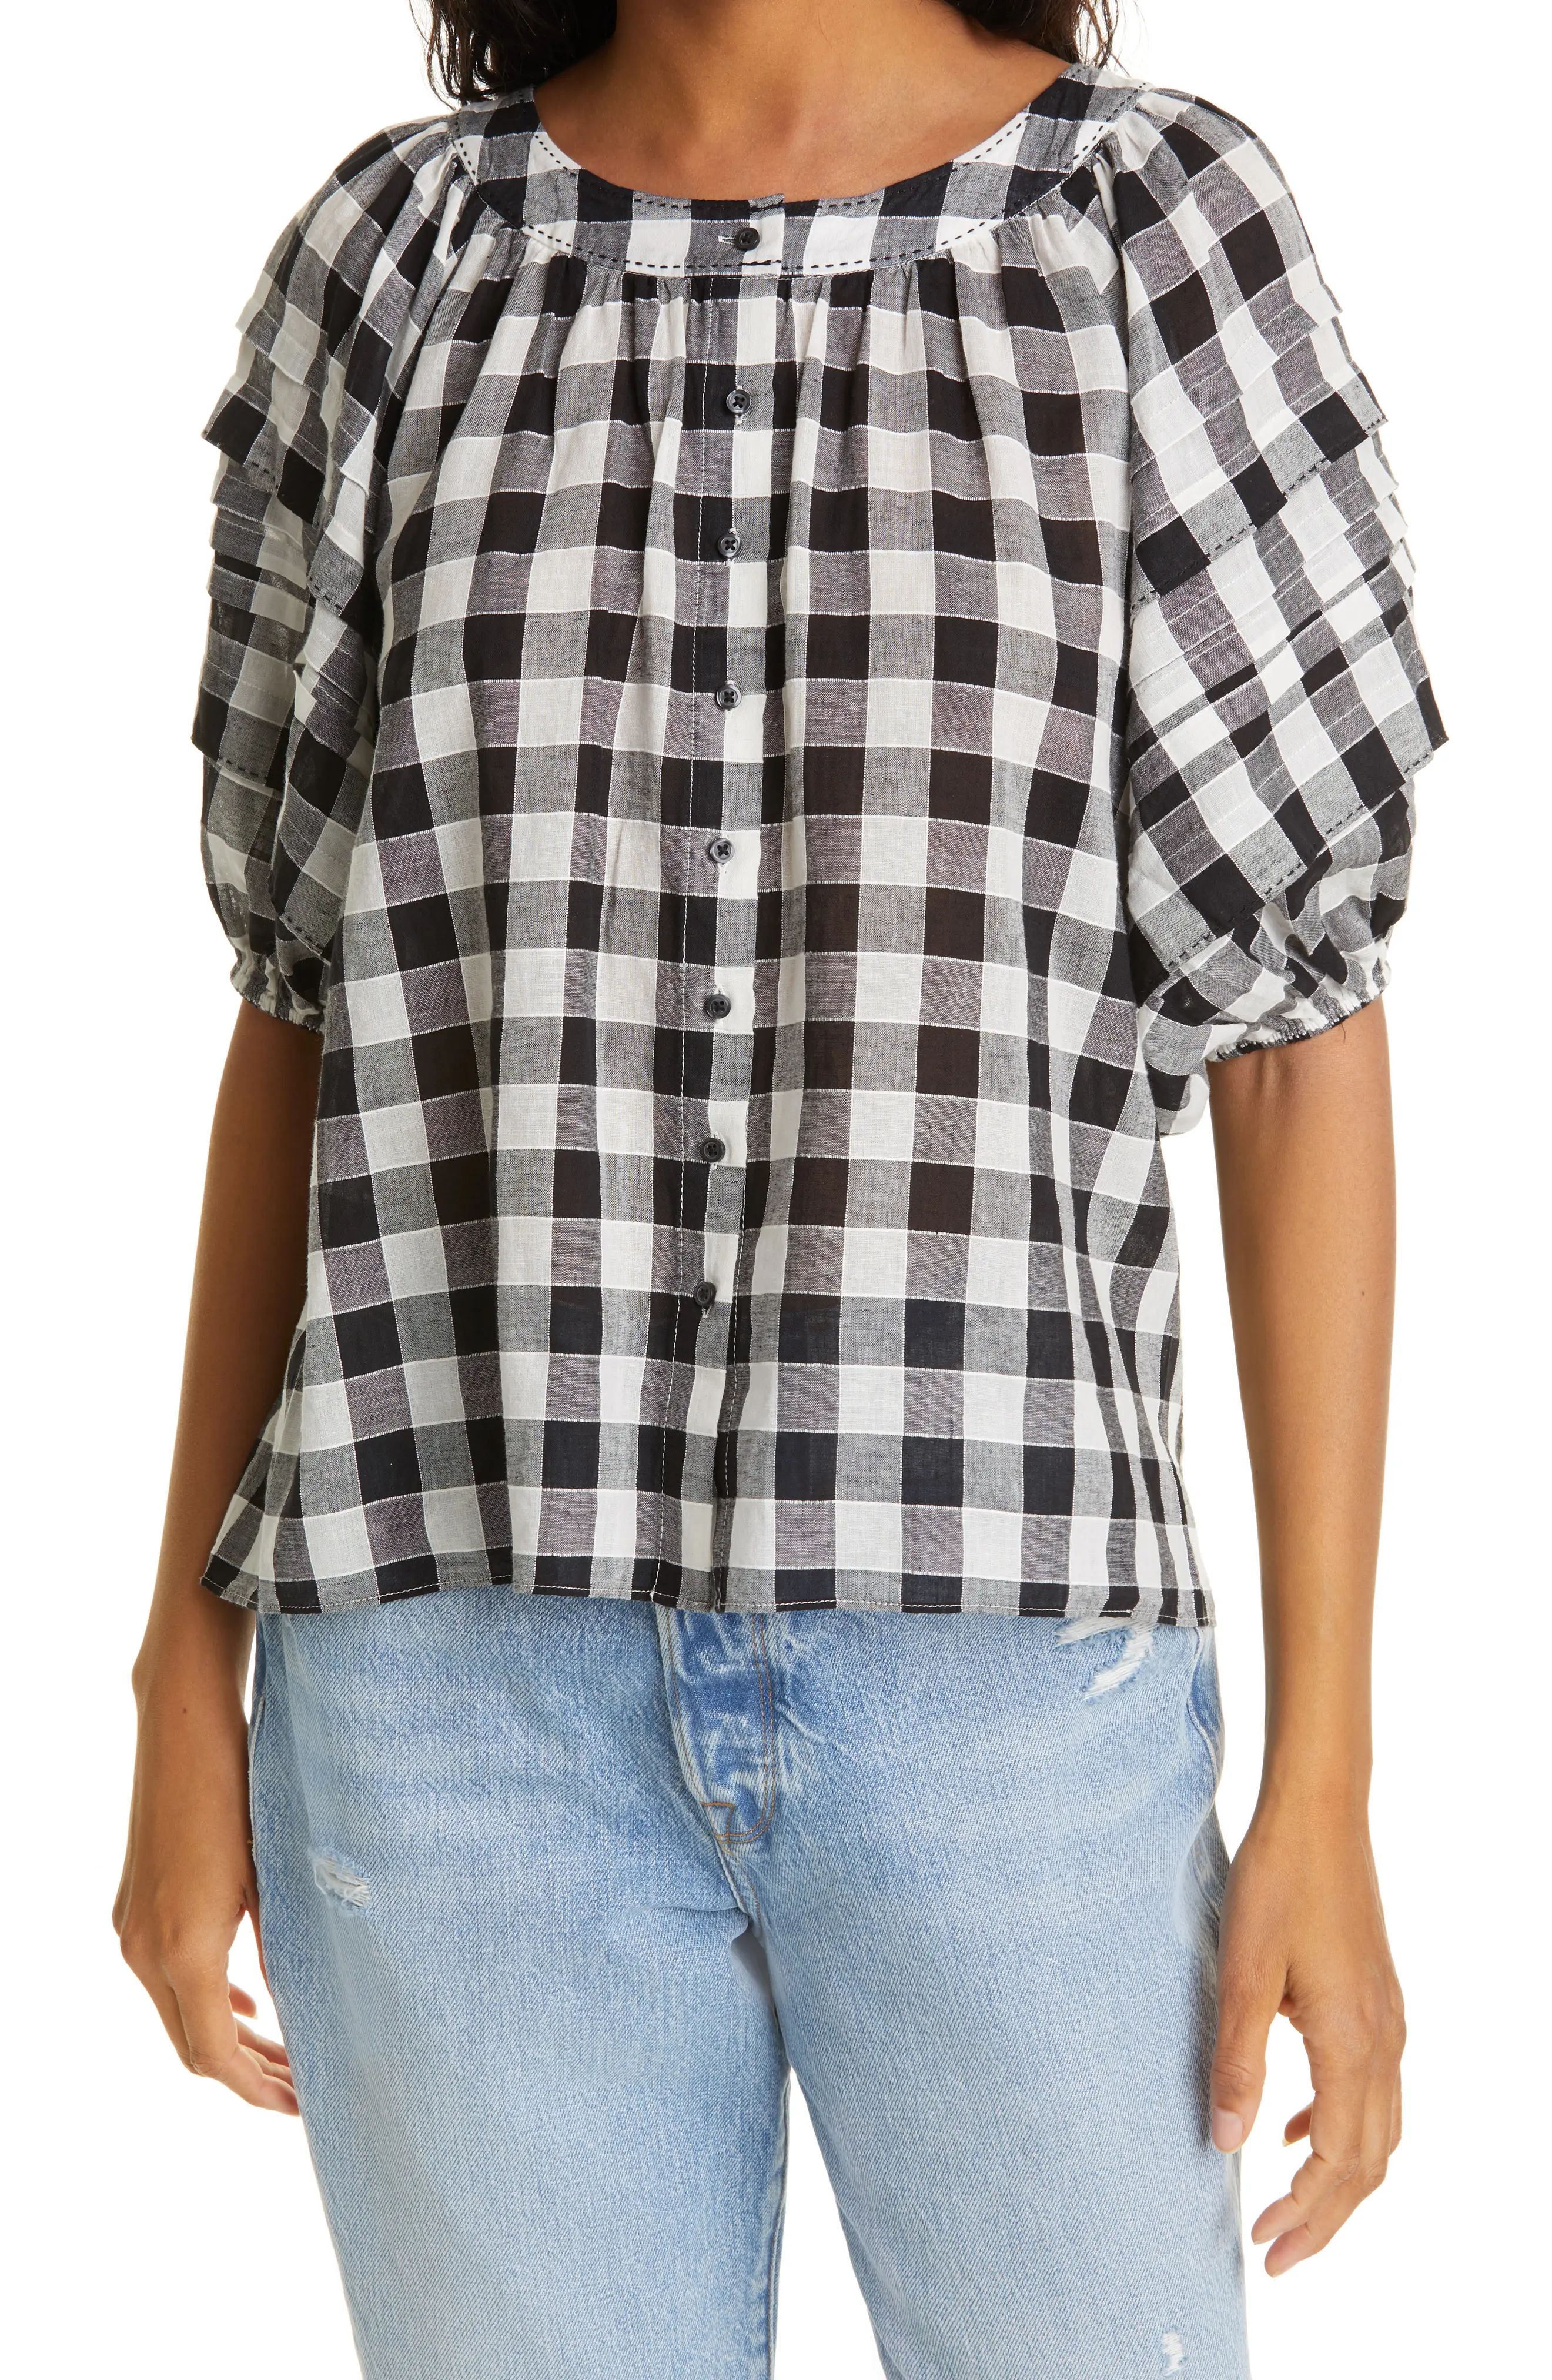 THE GREAT. Carriage Blouse in Black Cream Gingham at Nordstrom, Size 3 | Nordstrom